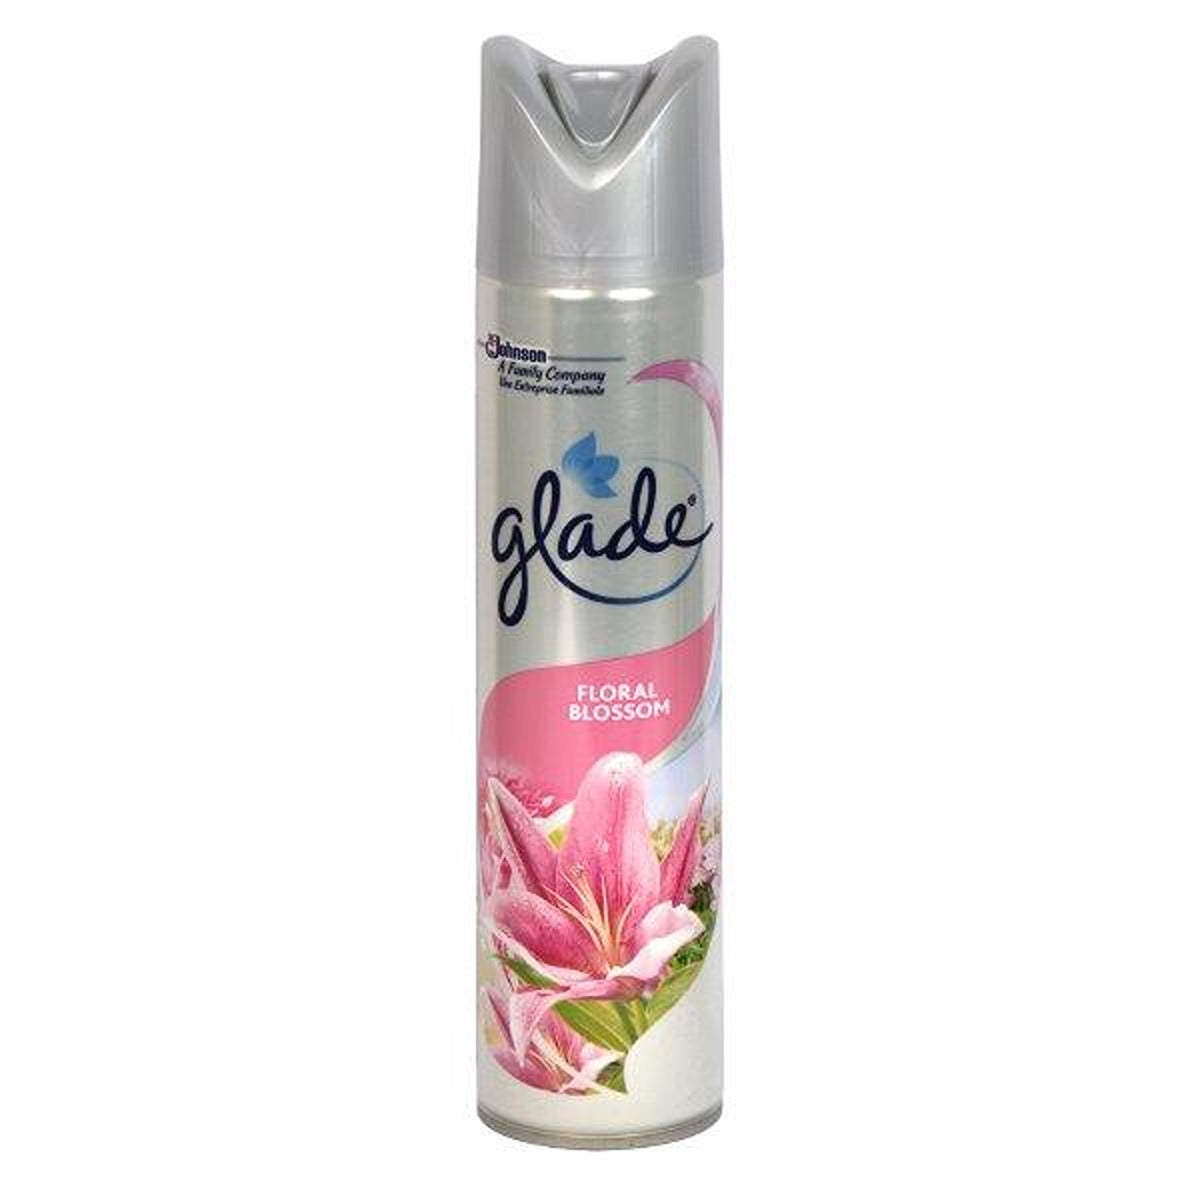 Glade - Floral Blossom Air Freshener Spray - 300ml - Continental Food Store